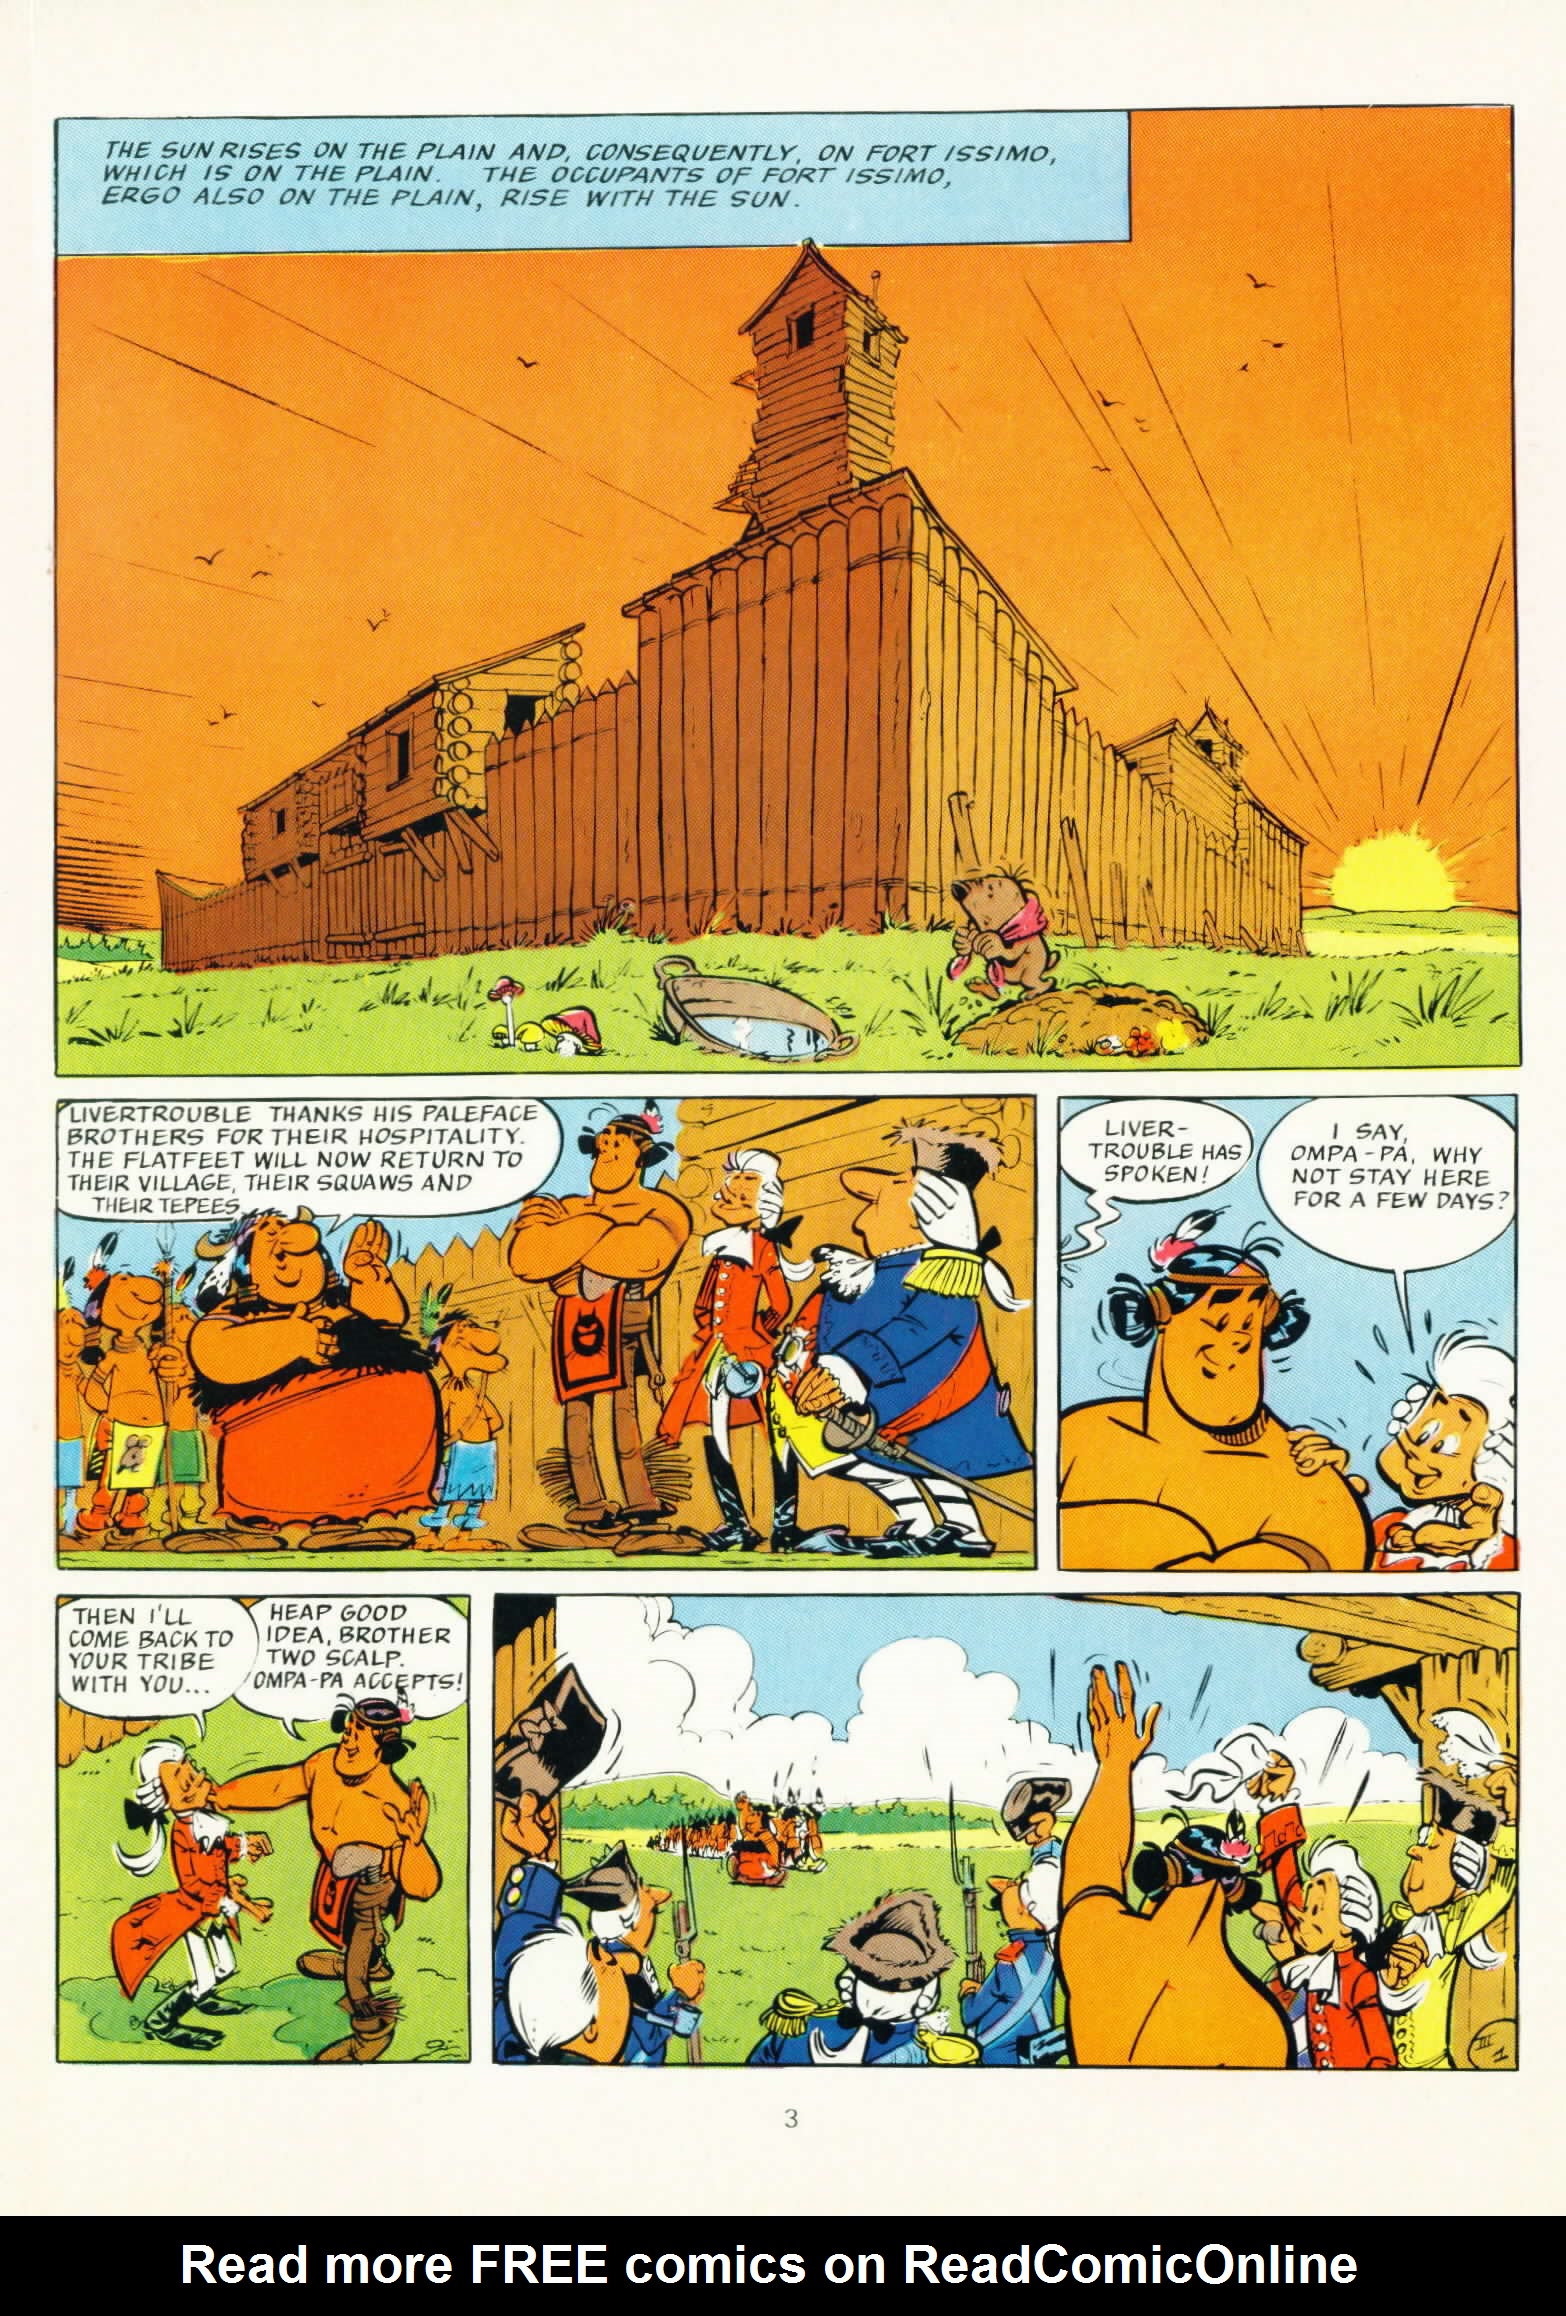 Read online Ompa-pa the Redskin comic -  Issue #3 - 4